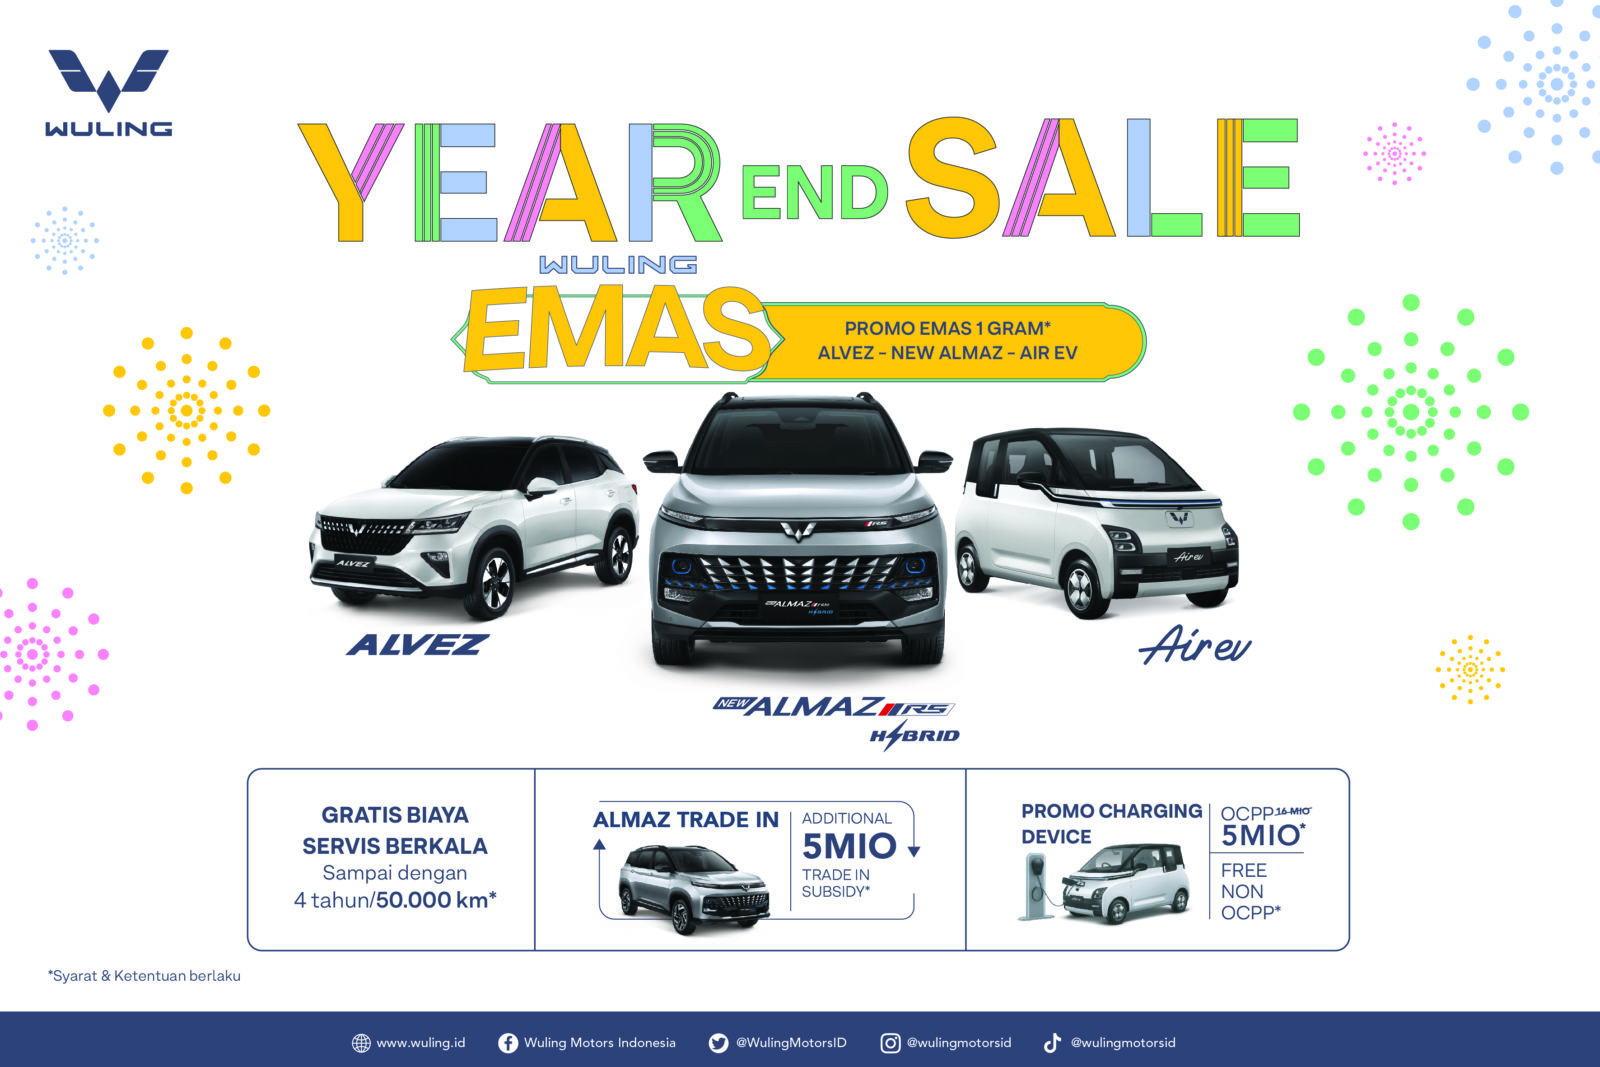 Image Celebrating November, Wuling Carries out The ‘Year End Sale’ Promo Program